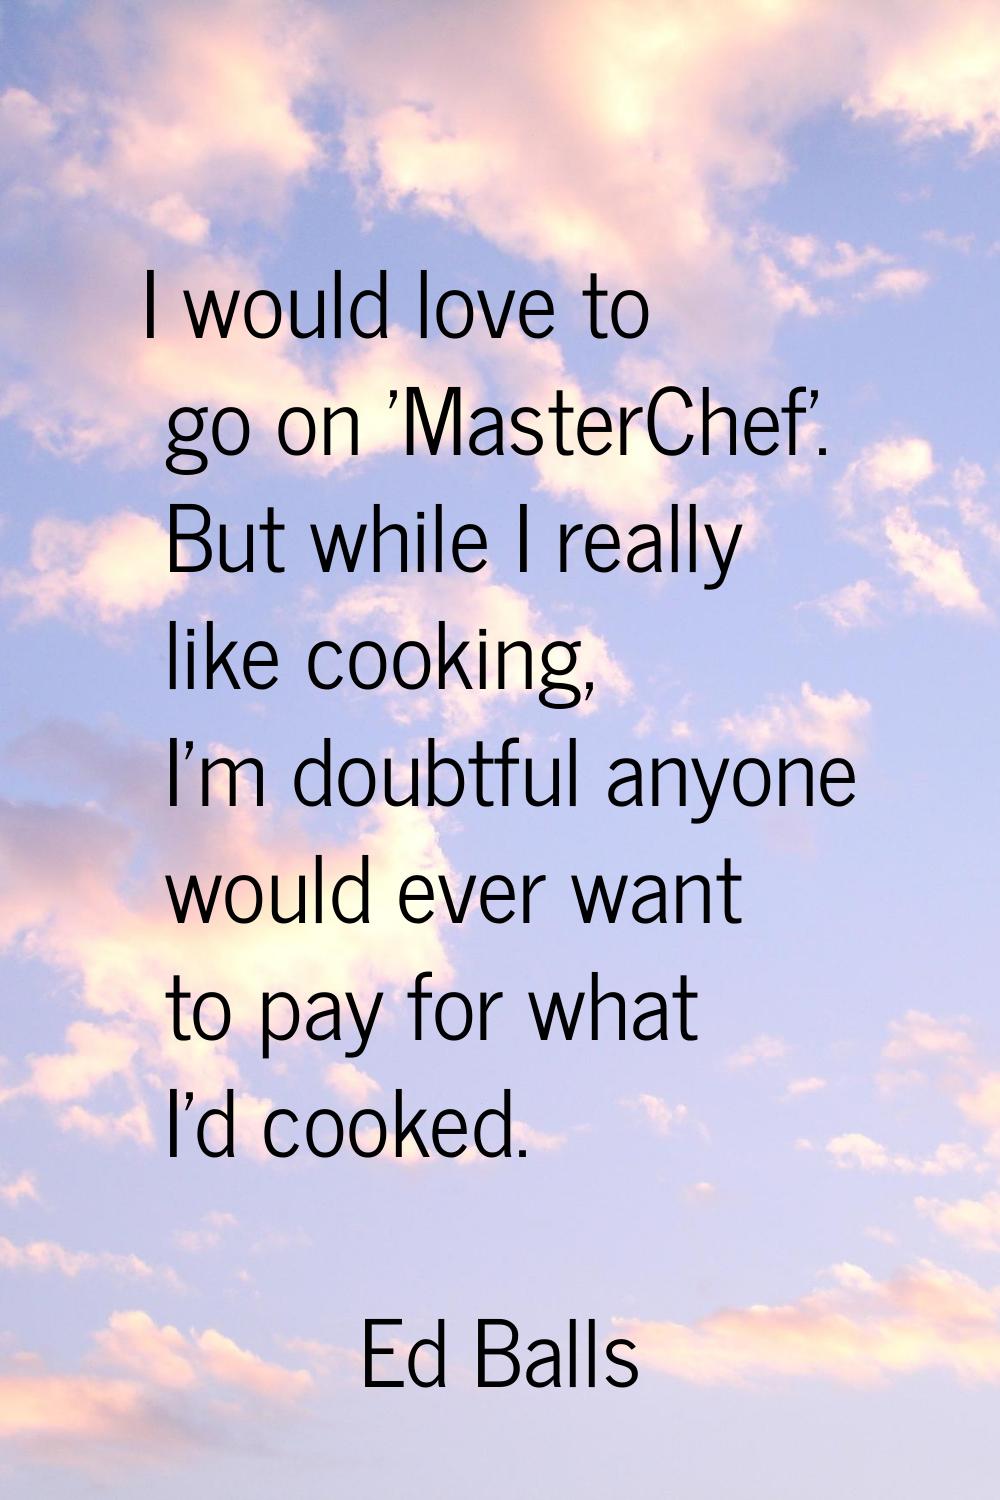 I would love to go on 'MasterChef'. But while I really like cooking, I'm doubtful anyone would ever